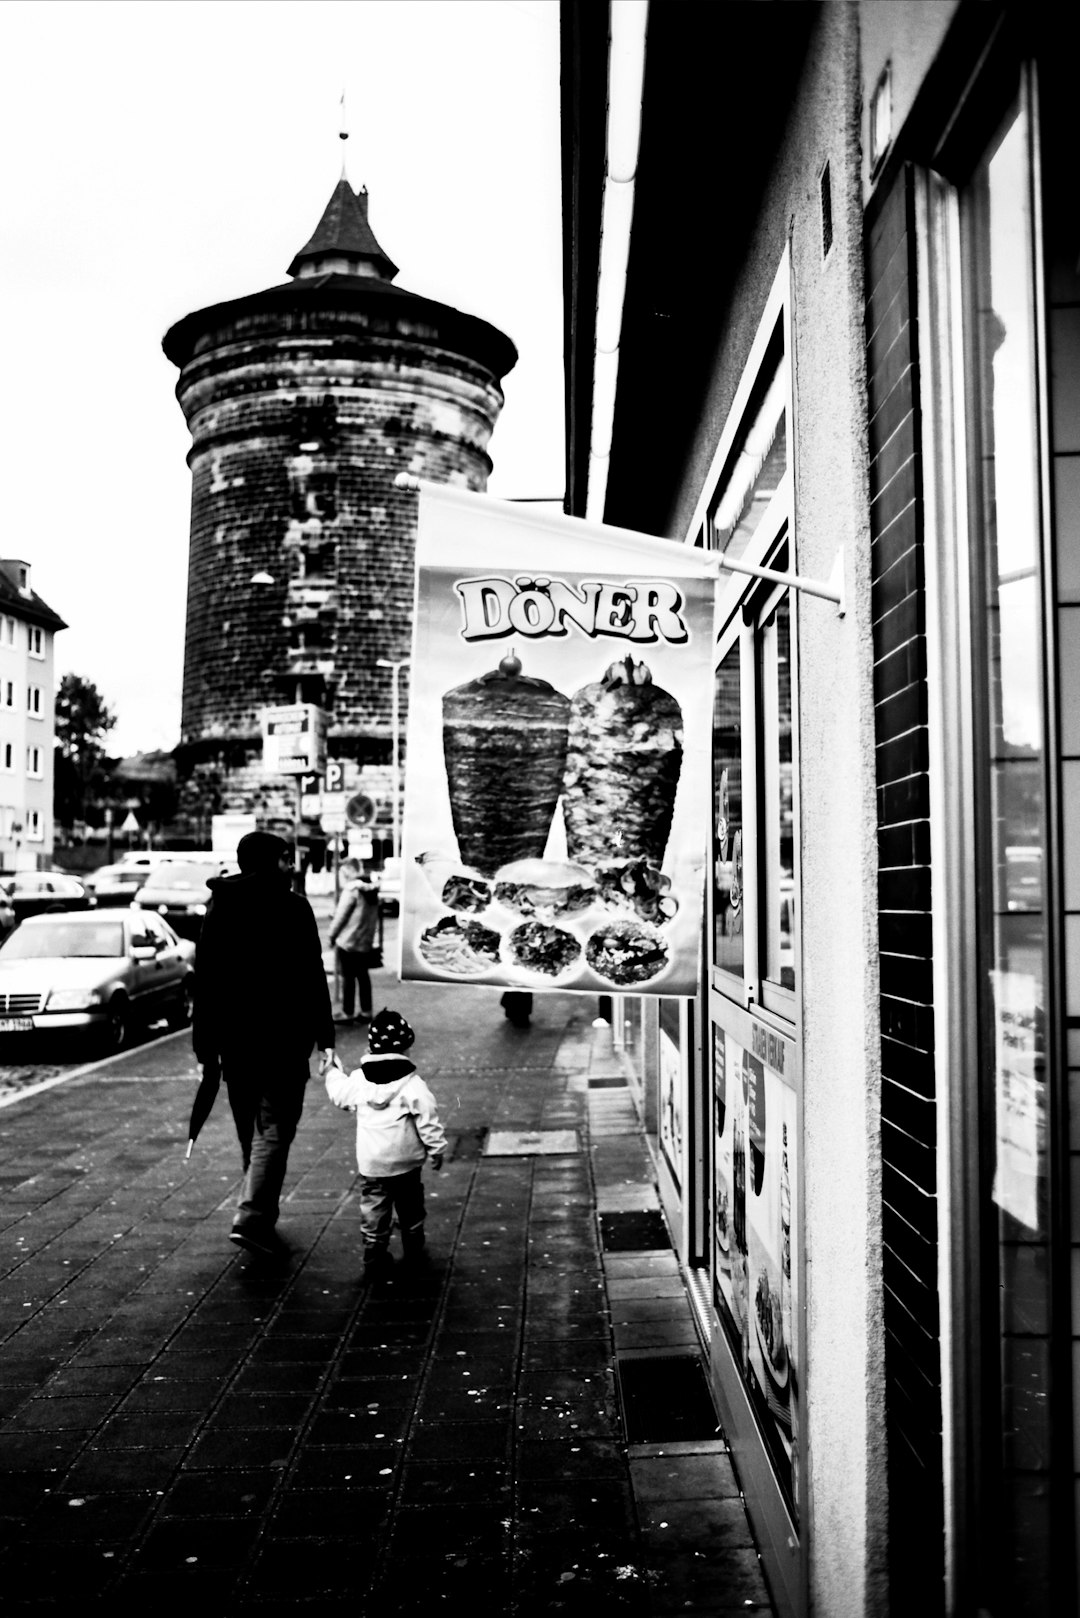 Döner snack bar. Made with Leica R7 (Year: 1994) and Leica Summilux-R 1.4 50mm (Year: 1983). Analog scan via Foto Brinke Forchheim: Fuji Frontier SP-3000. Film reel: Kodak Technical Pan 25 s/w (expired in 1997)